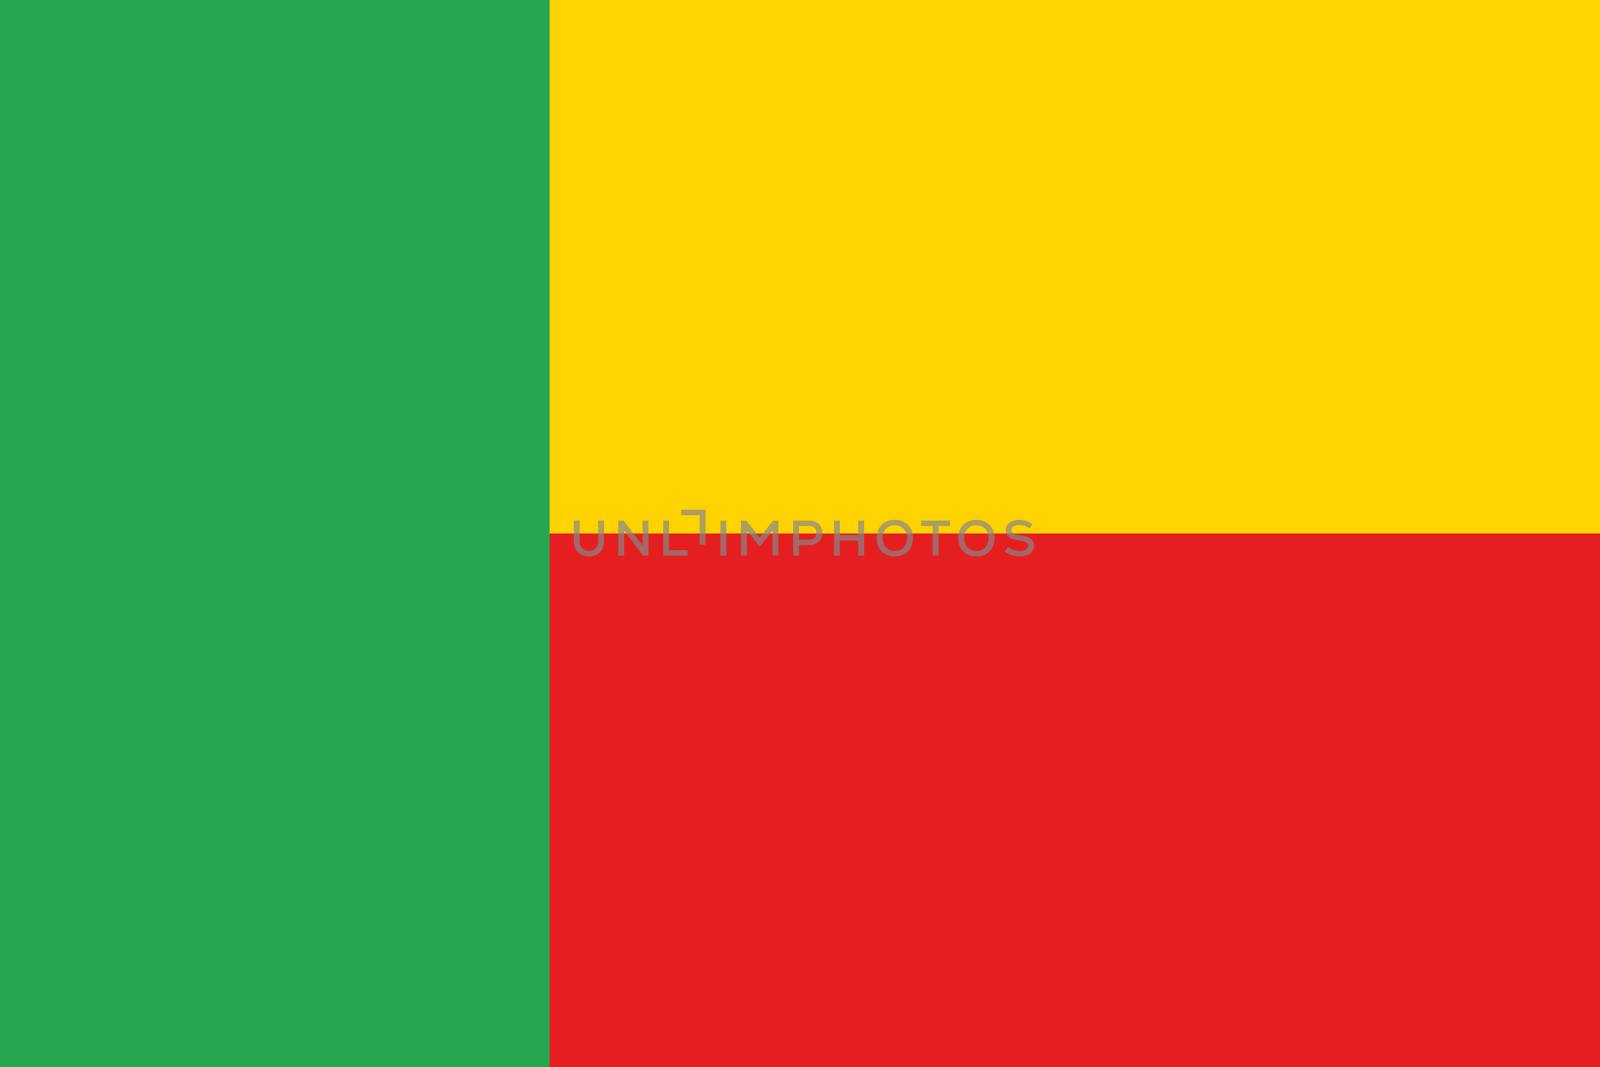 Illustrated Drawing of the flag of Benin by DragonEyeMedia